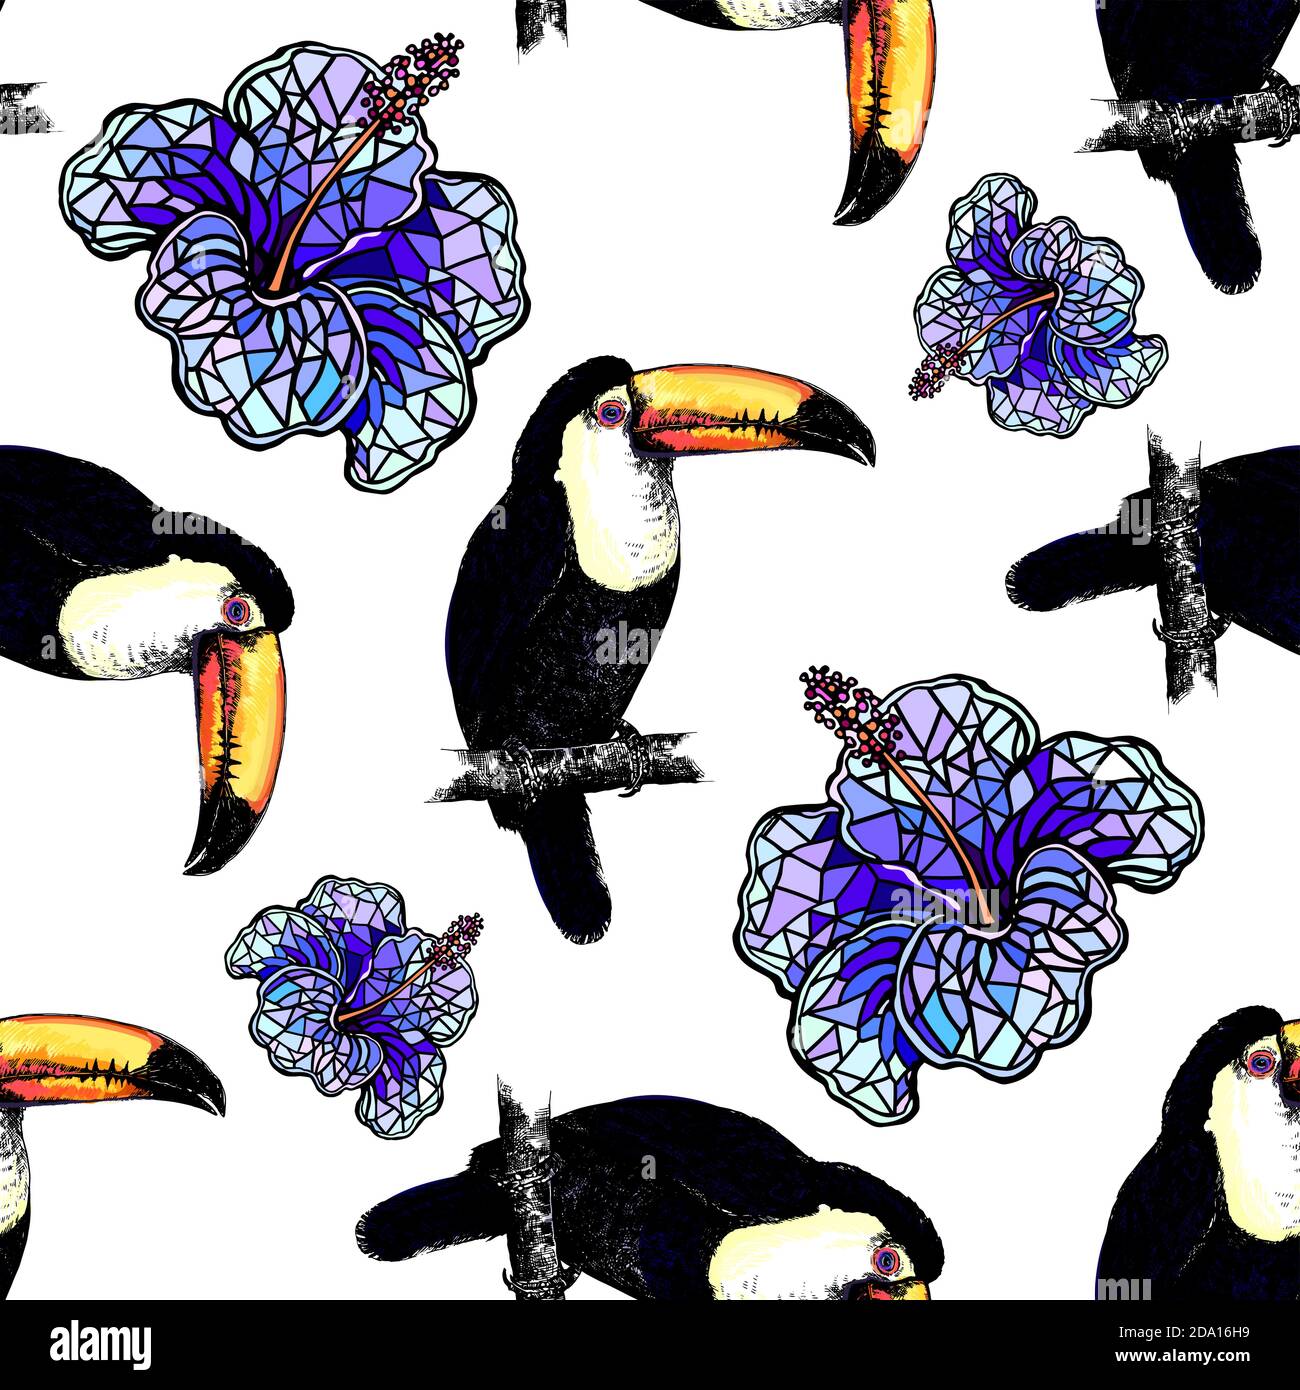 Seamless pattern of hand drawn sketch style colorful toucans and abstract flowers. Vector illustration isolated on white background. Stock Vector